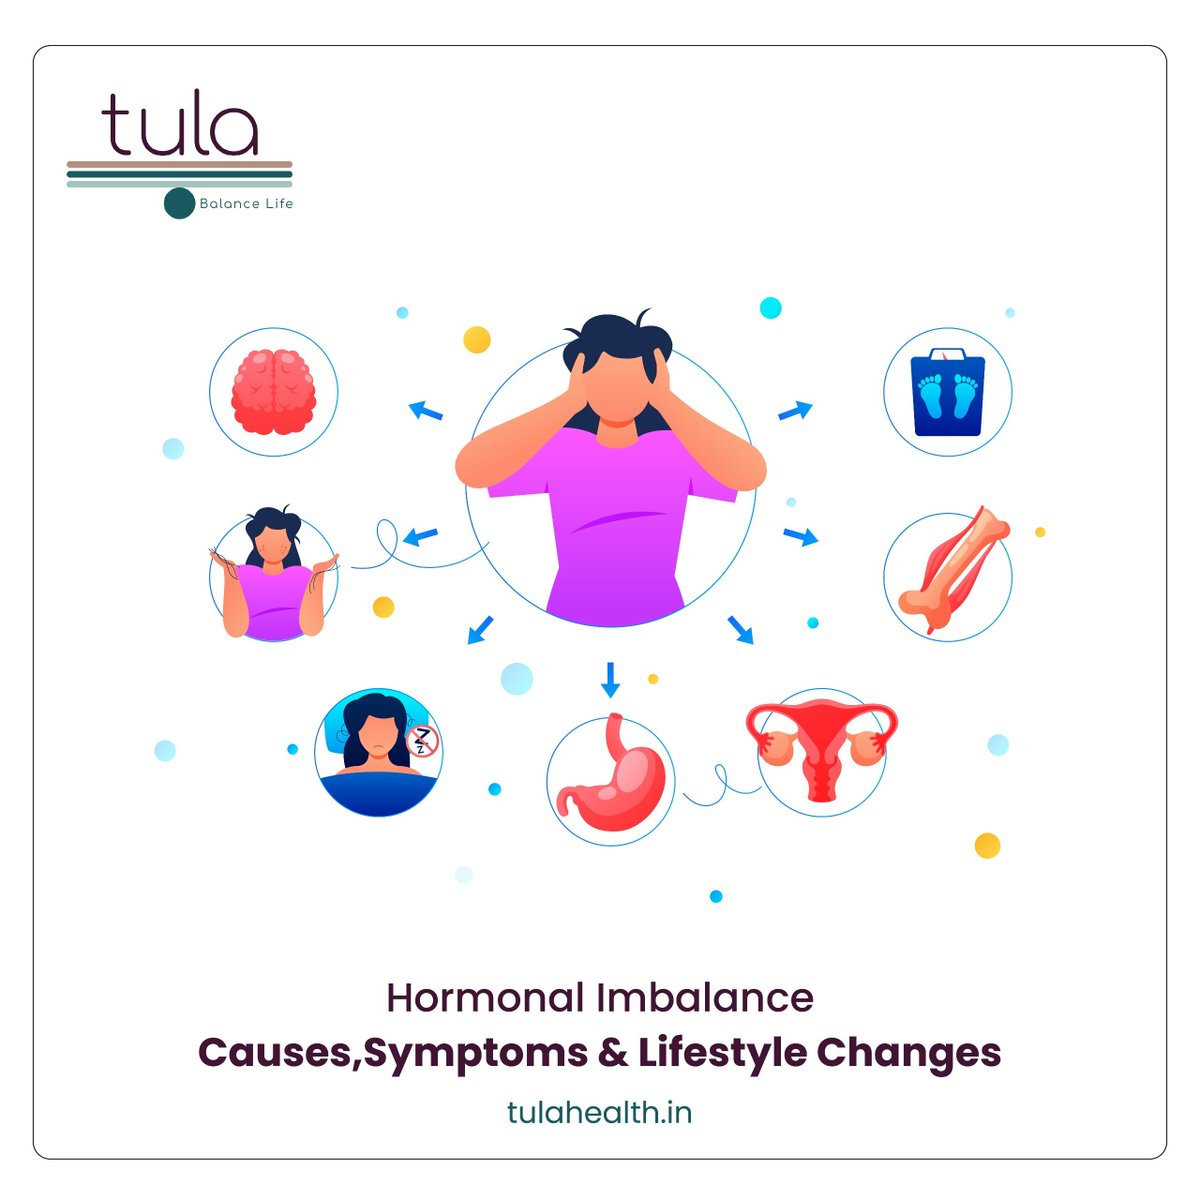 Discover how to address hormonal imbalance, and explore common symptoms, causes, and effective lifestyle changes to overall well-being. 

To Read More: tulahealth.in/blogs/hormonal…

#HormonalBalance #HealthAndWellness #HormoneImbalance #HormoneHealth #WellnessJourney #LifestyleChanges